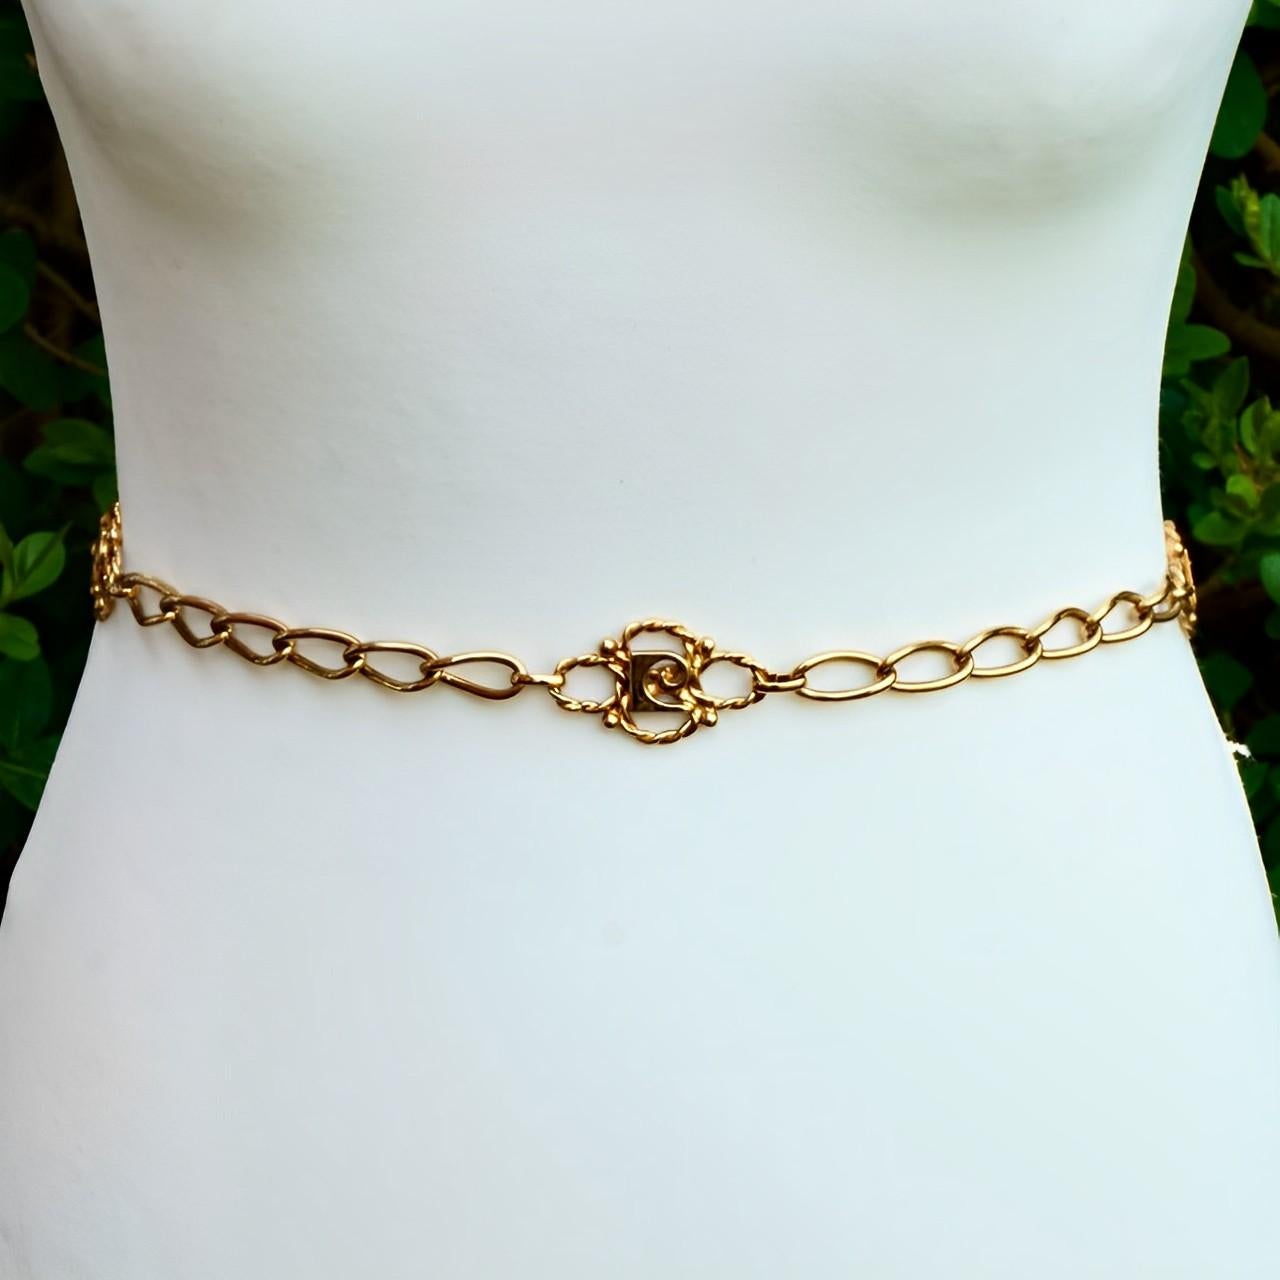 Pierre Cardin Monogram Gold Plated Chain Link Belt circa 1970s For Sale 2